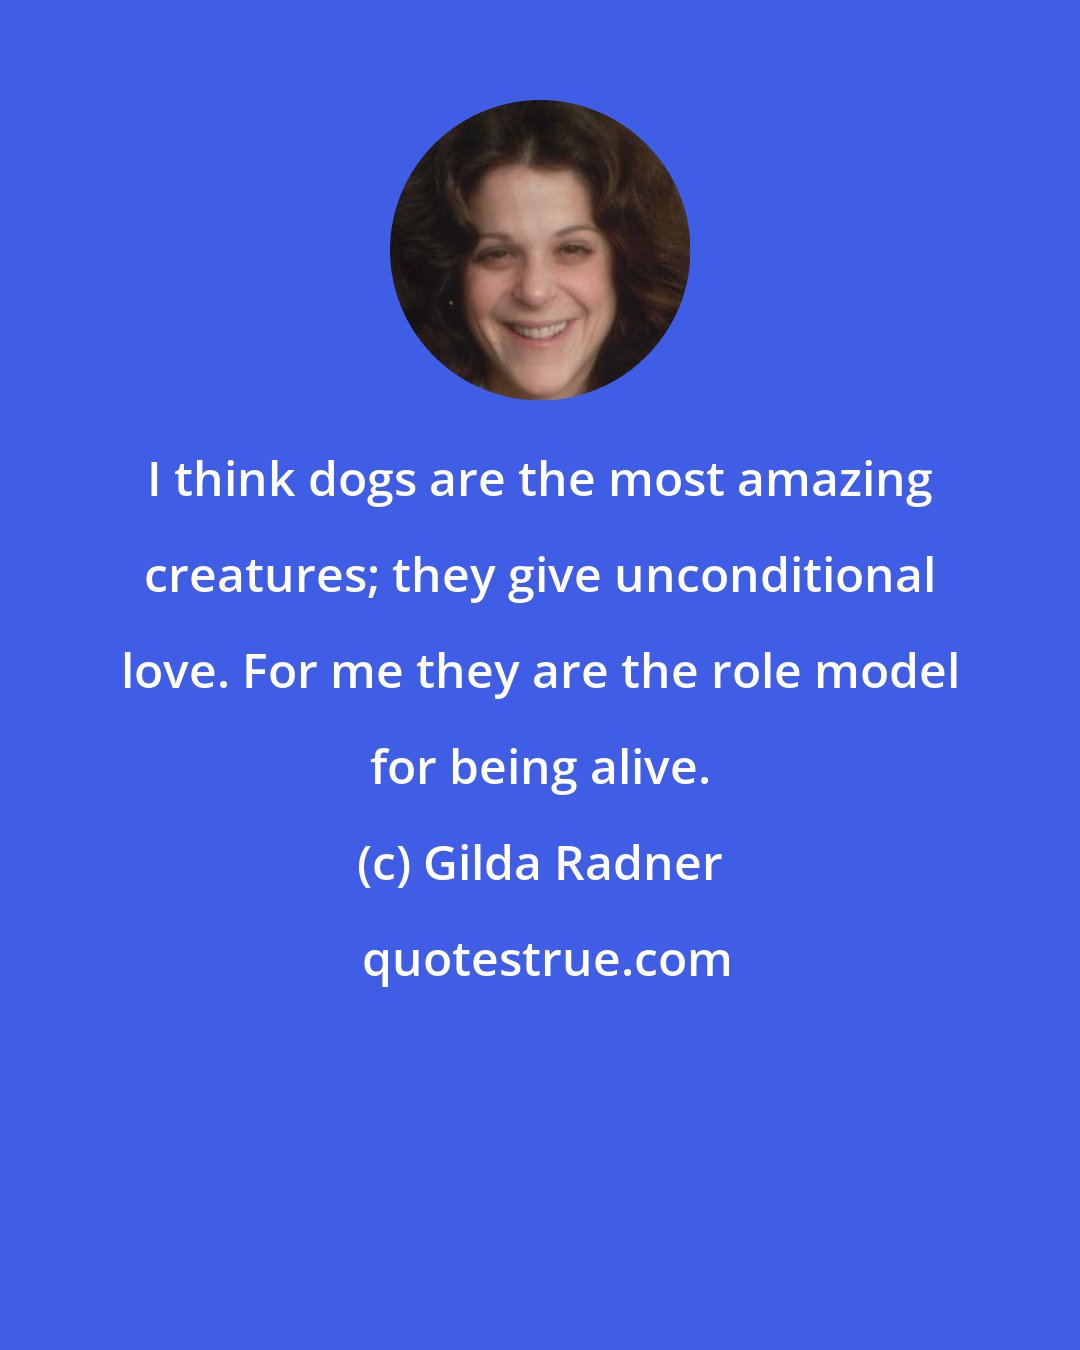 Gilda Radner: I think dogs are the most amazing creatures; they give unconditional love. For me they are the role model for being alive.